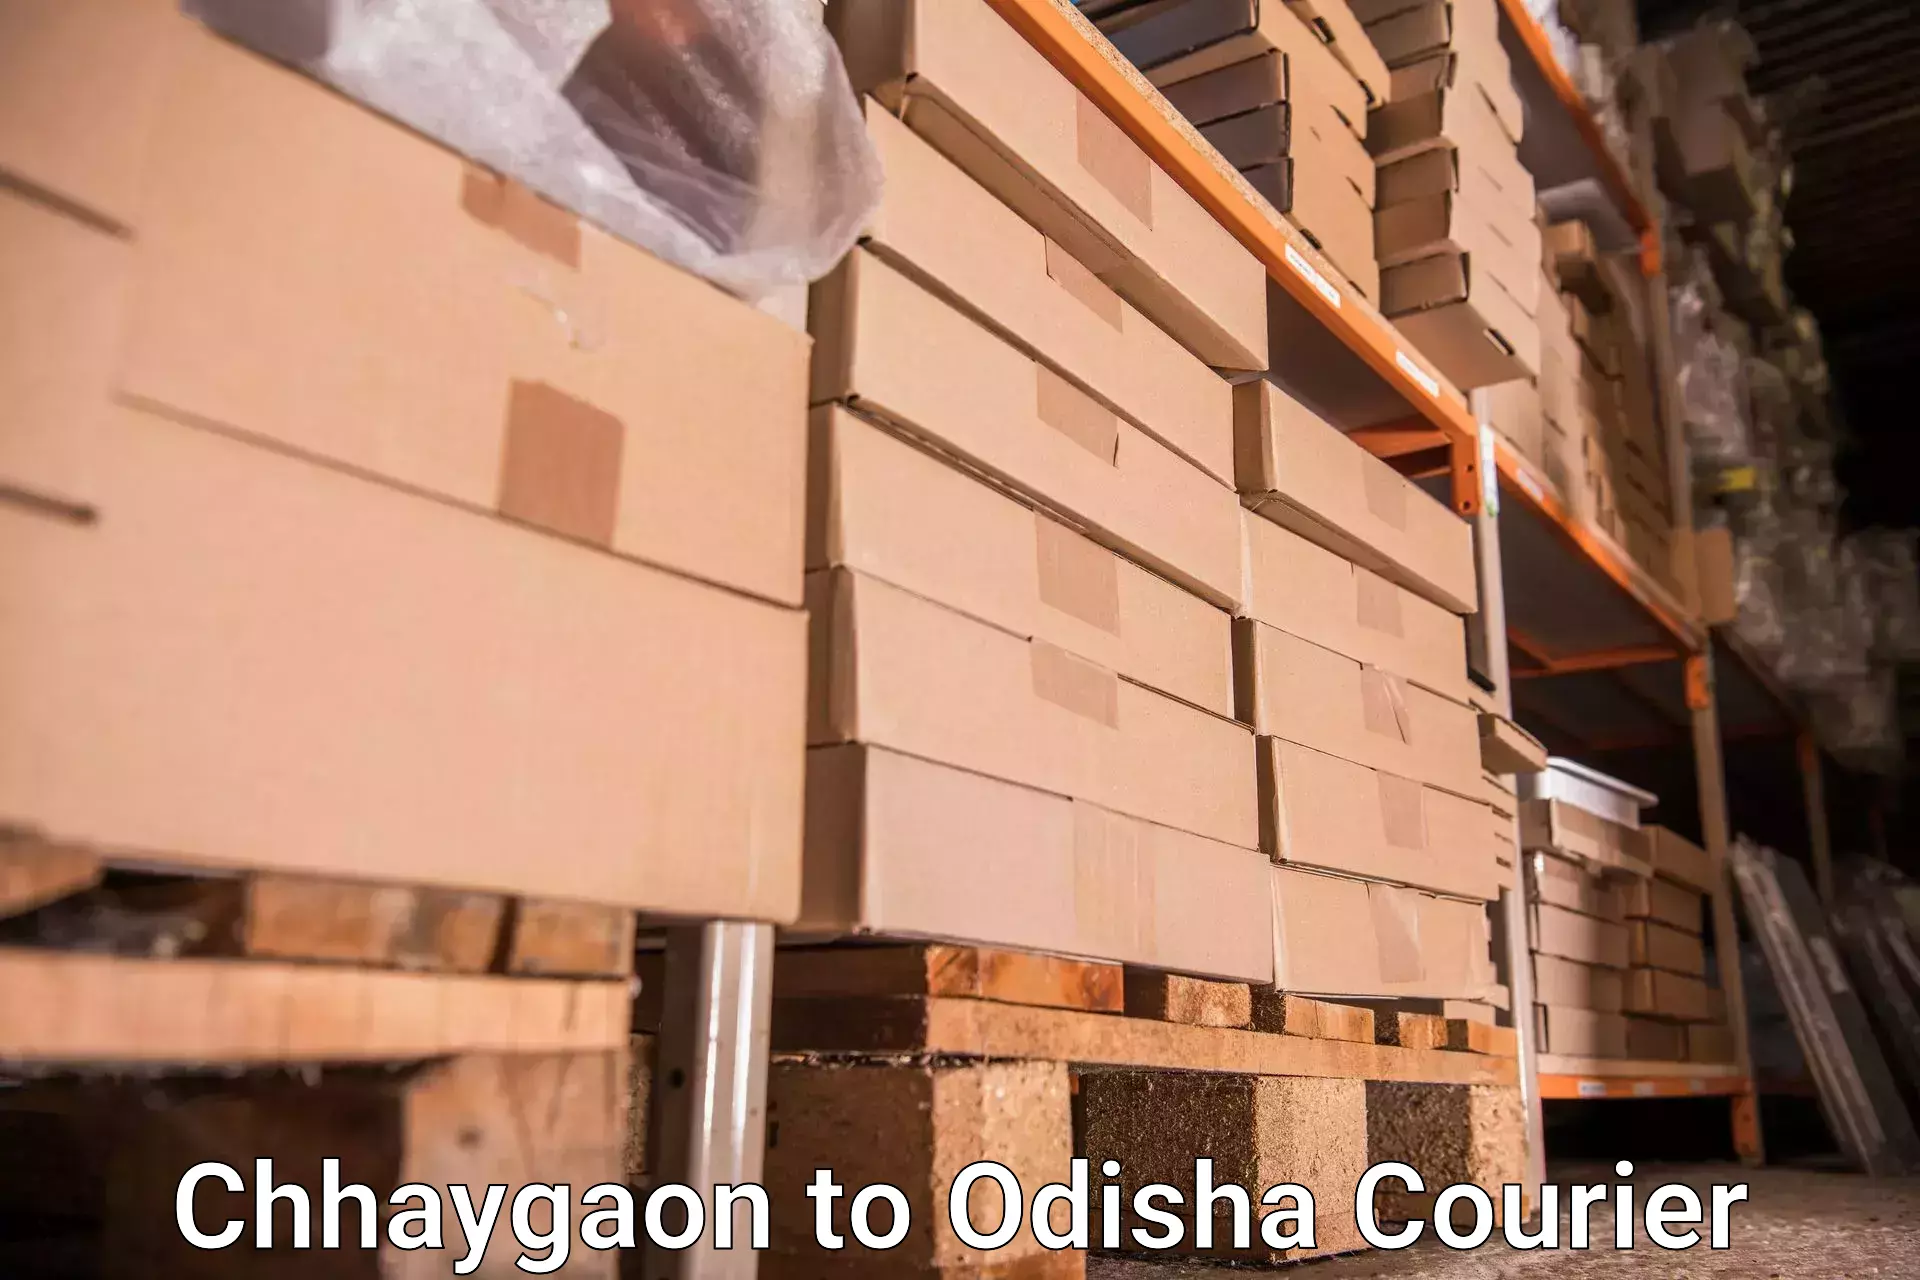 Luggage shipment specialists Chhaygaon to Bheden